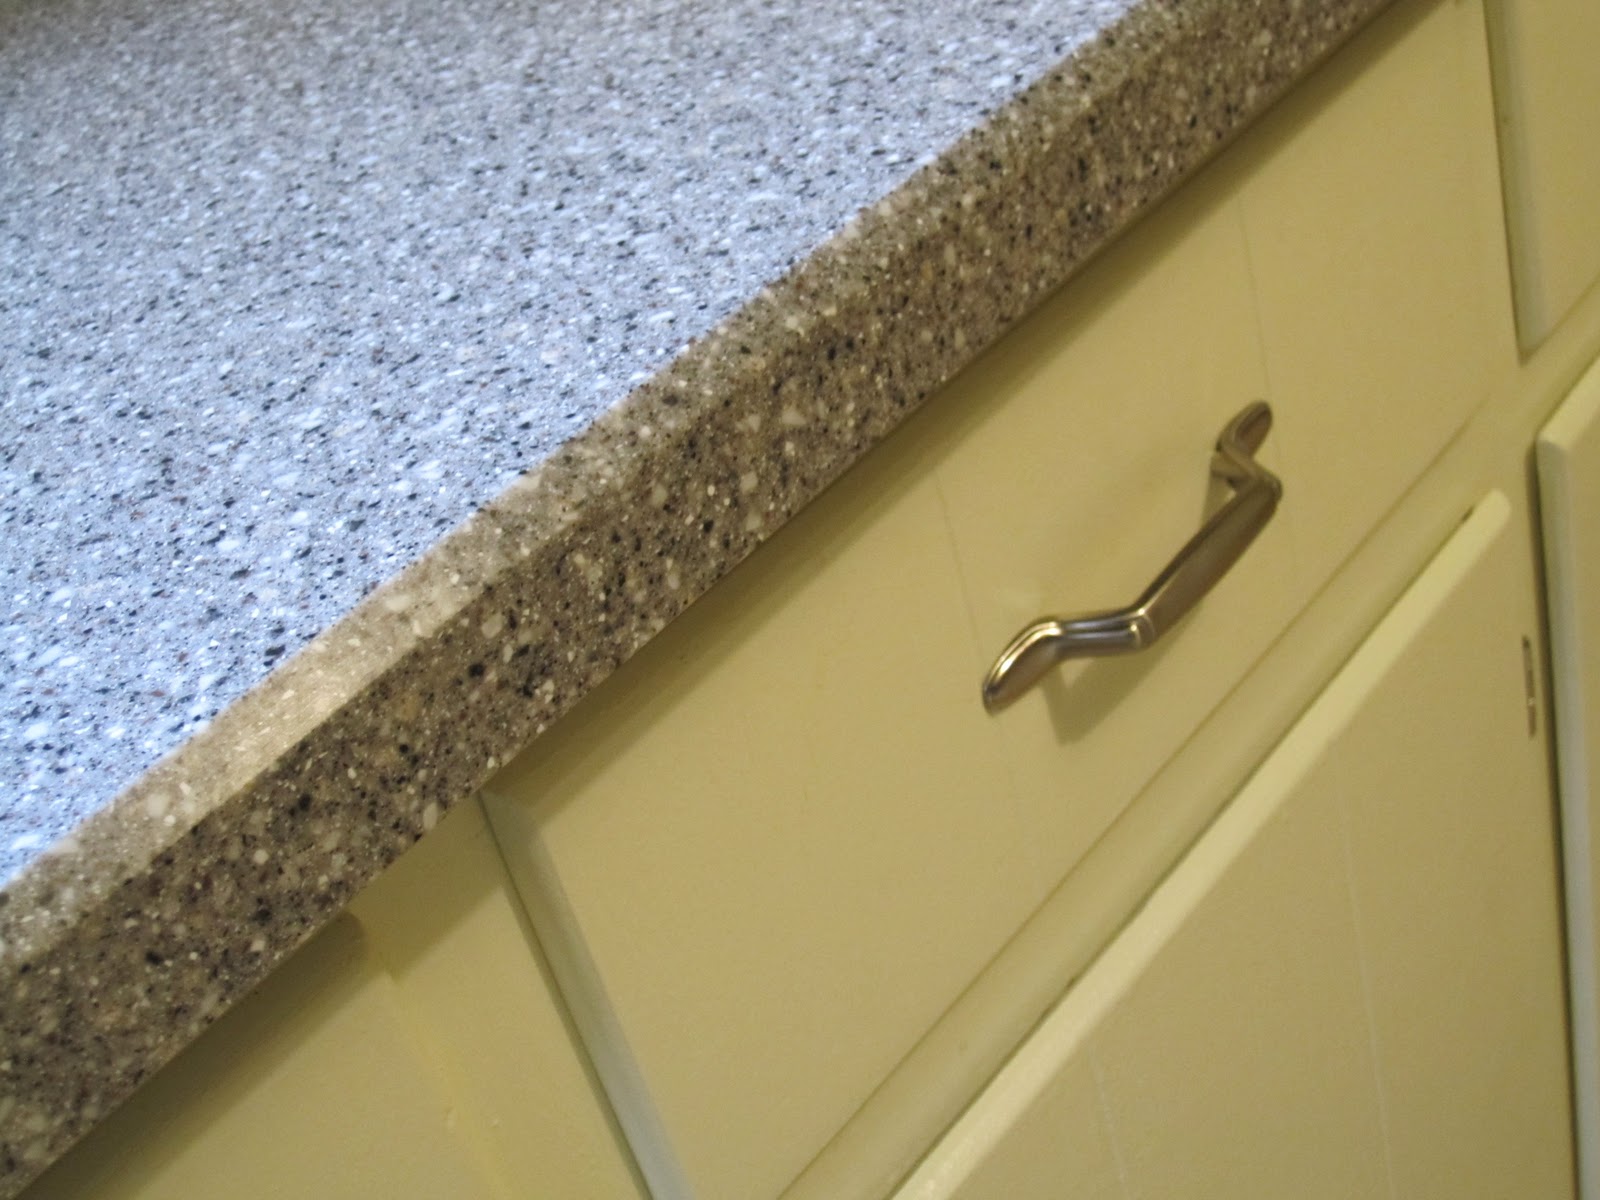 1700 for new solid surface counters and sink